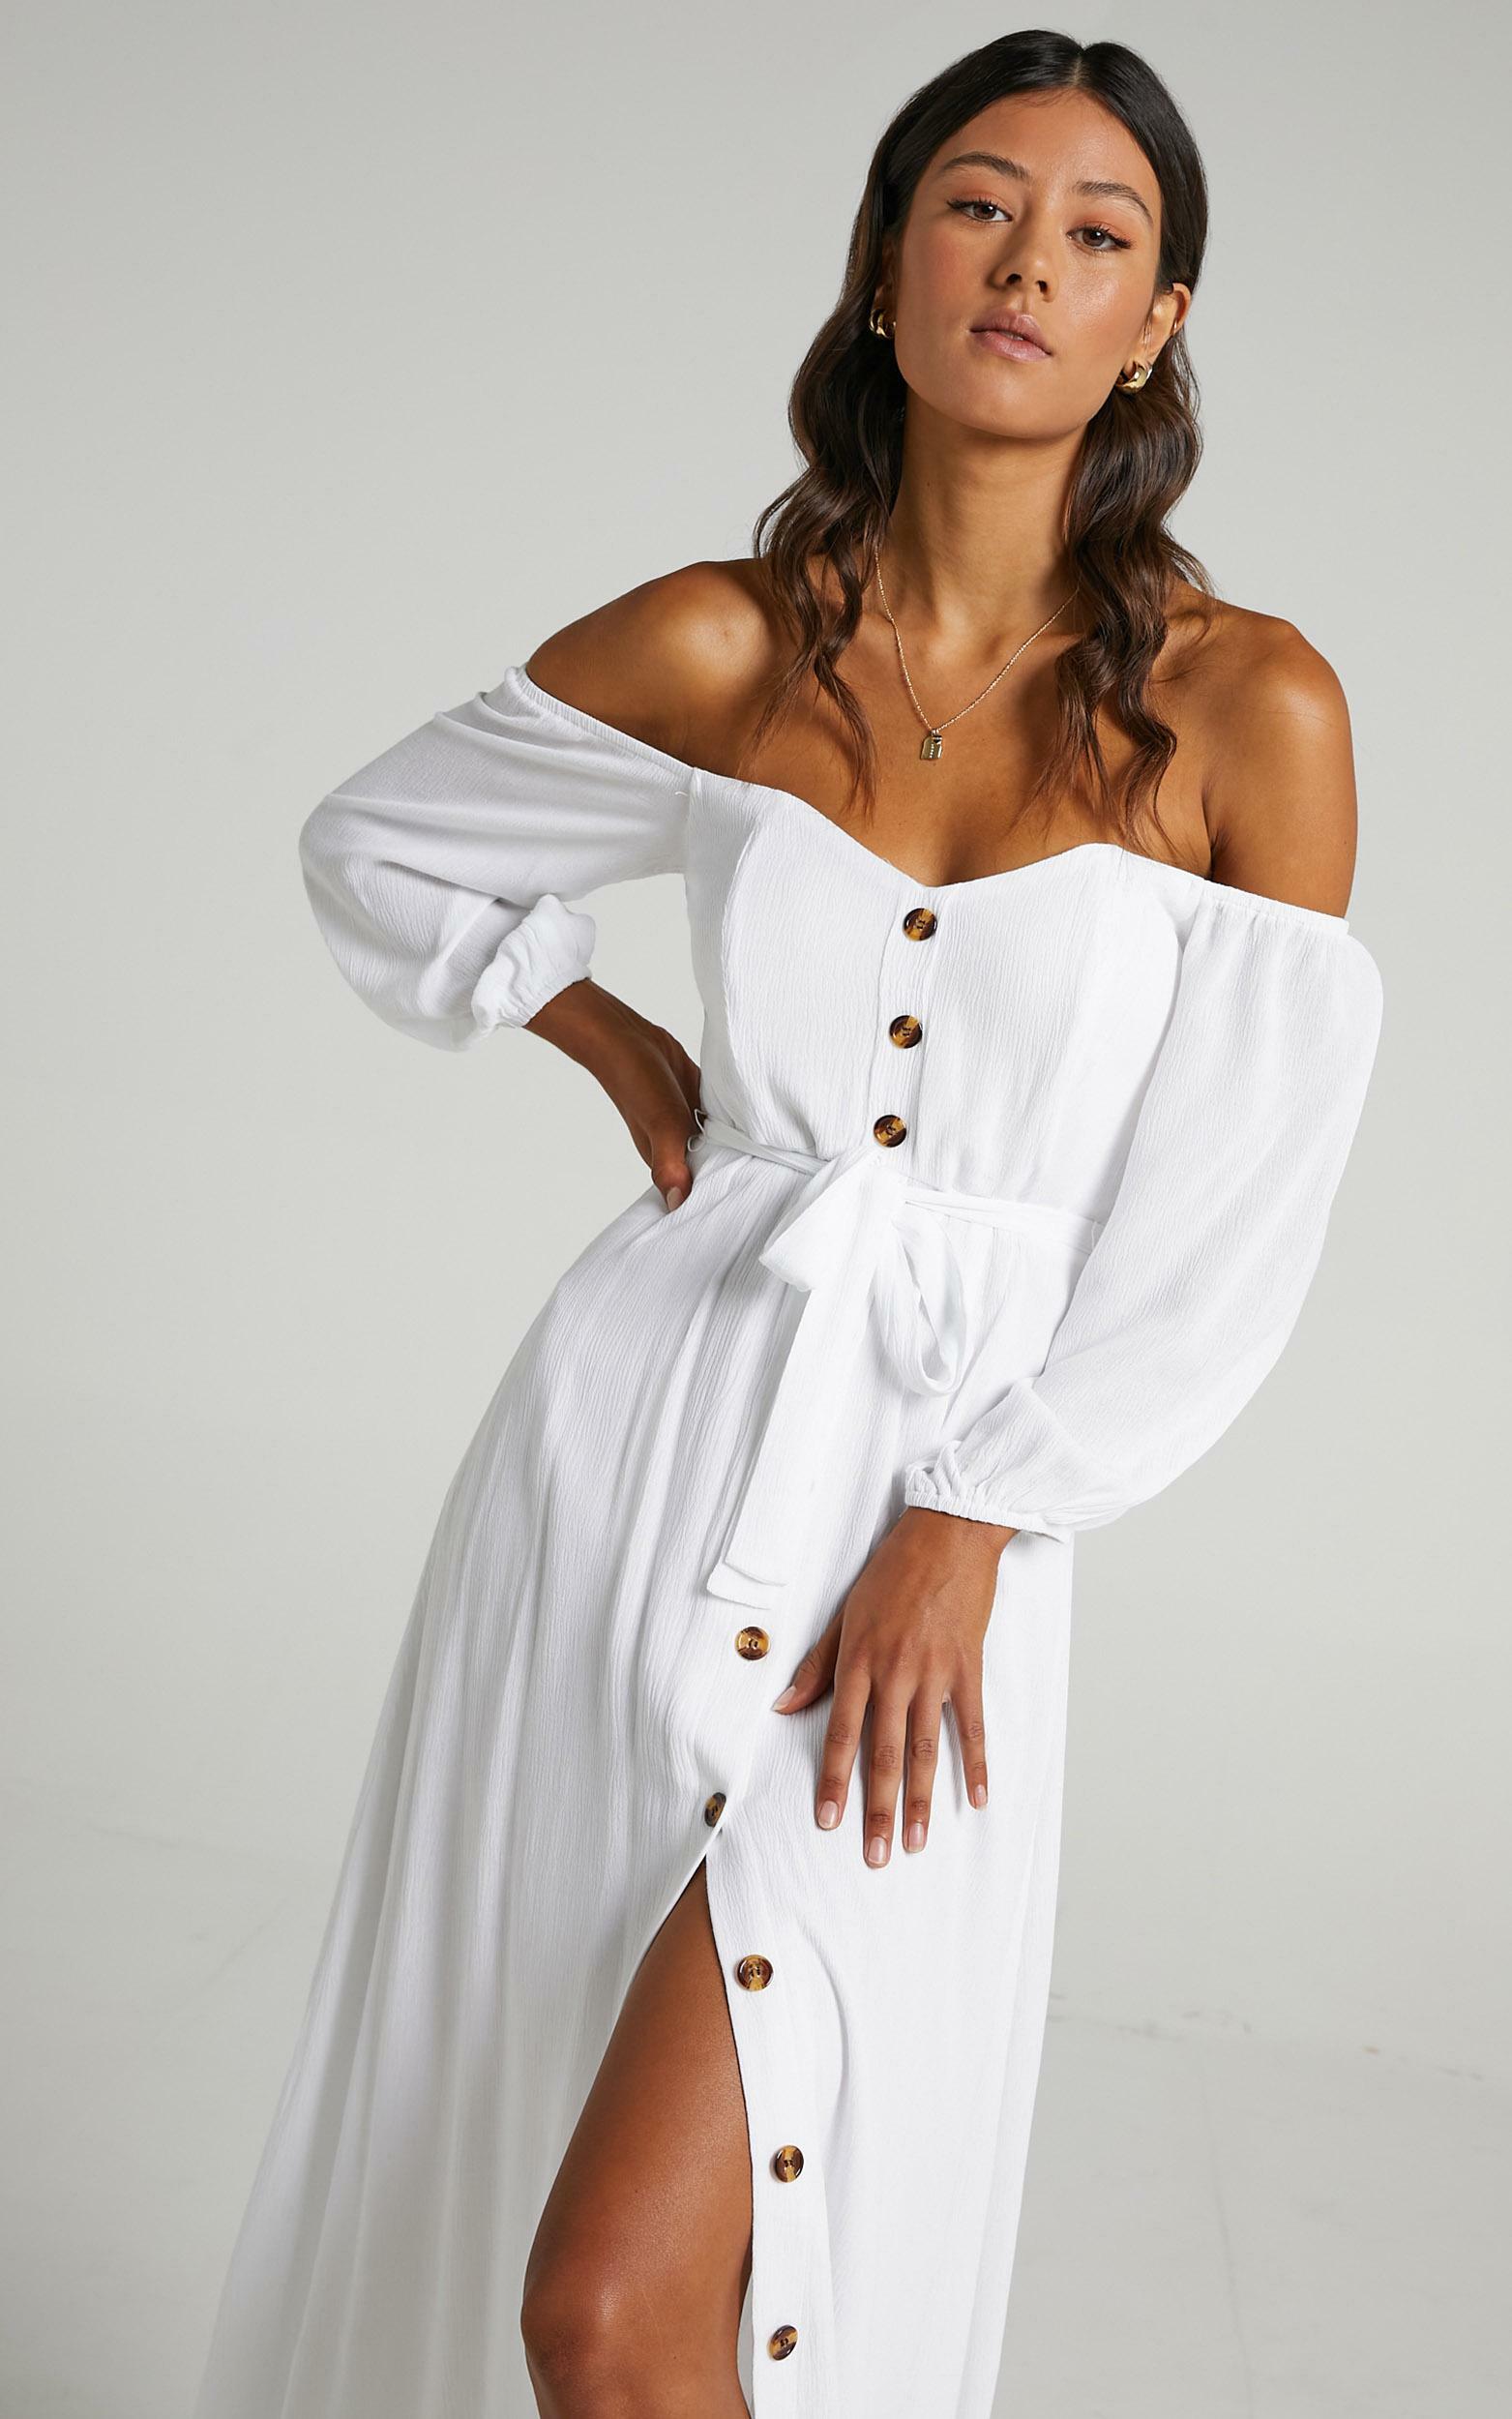 Sorrento Dreaming Dress in White Linen Look - 20, WHT5, hi-res image number null